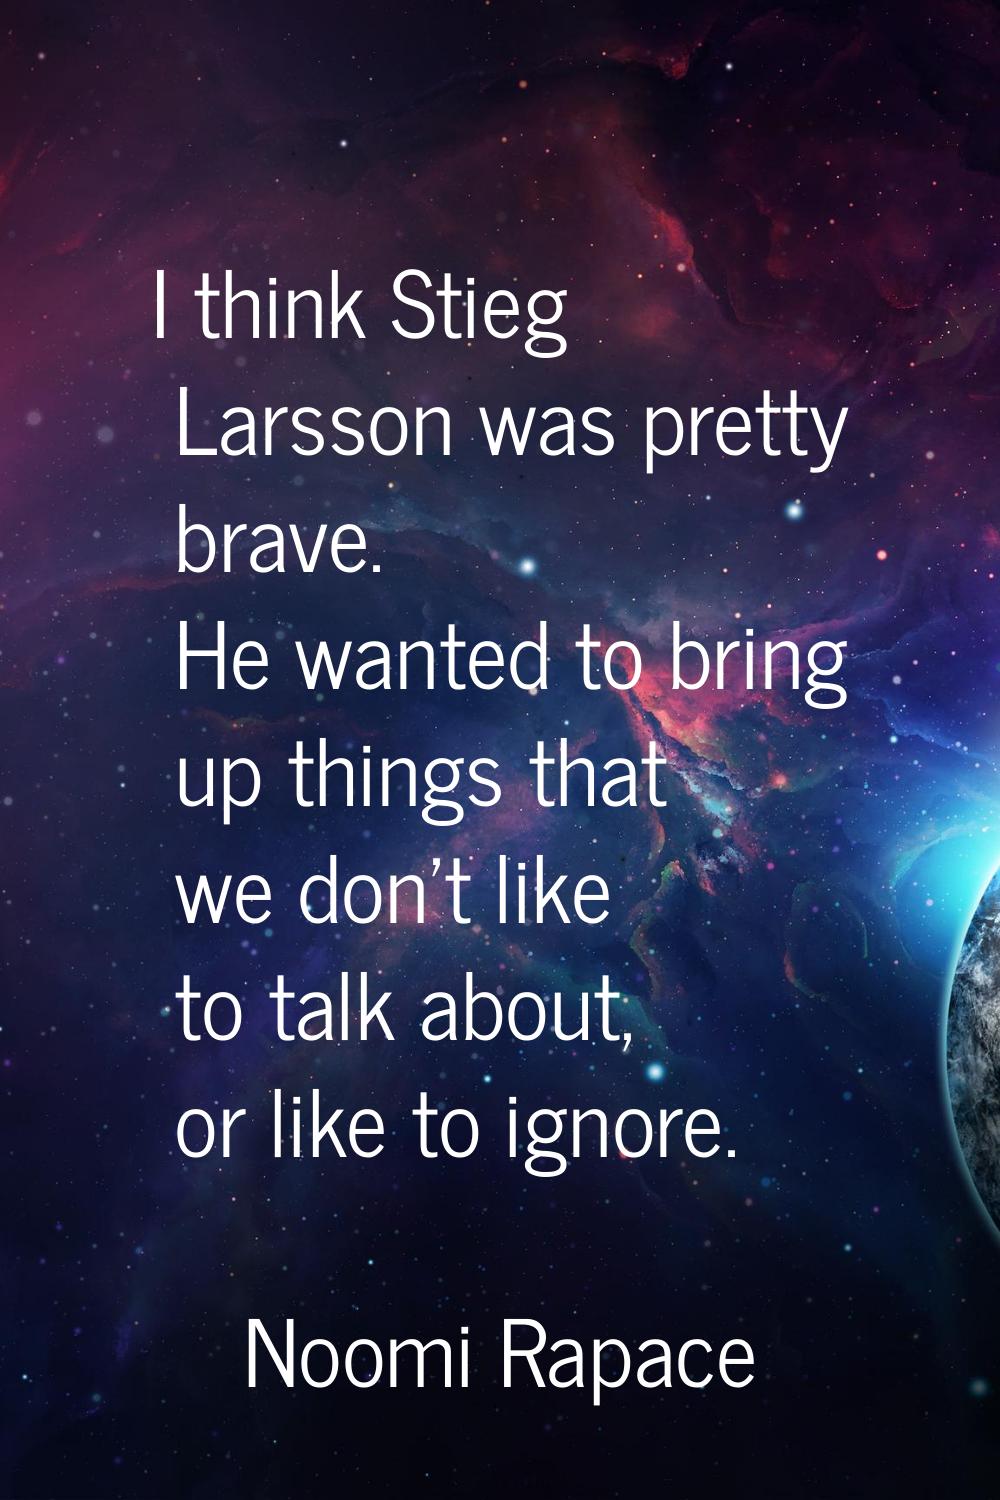 I think Stieg Larsson was pretty brave. He wanted to bring up things that we don't like to talk abo